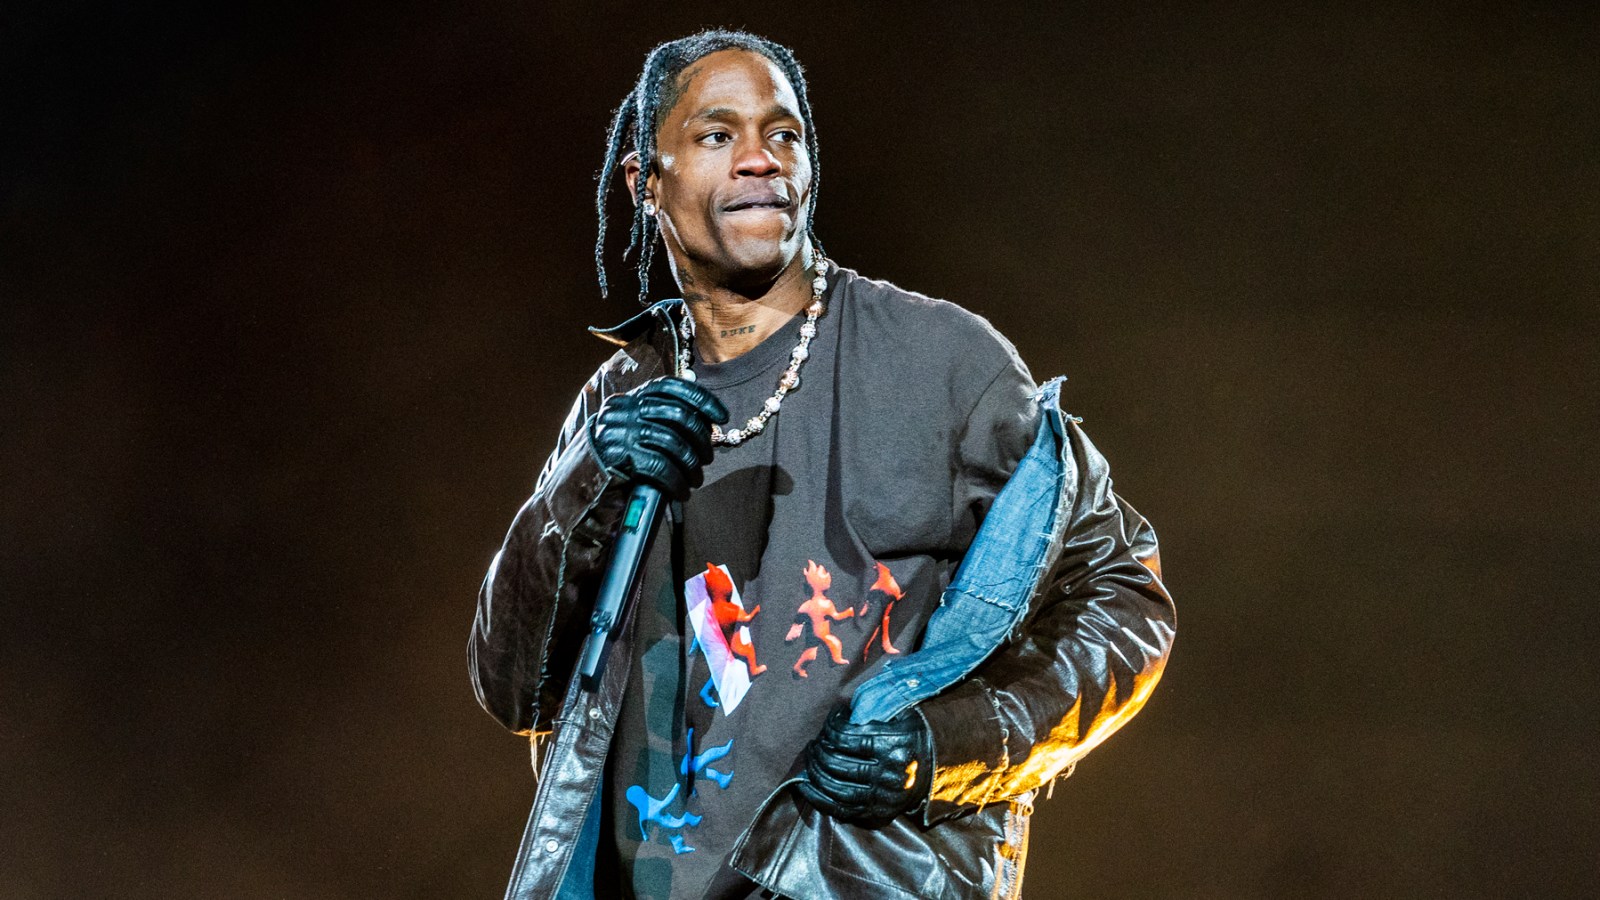 Nearly All Astroworld Wrongful Death Cases Settled